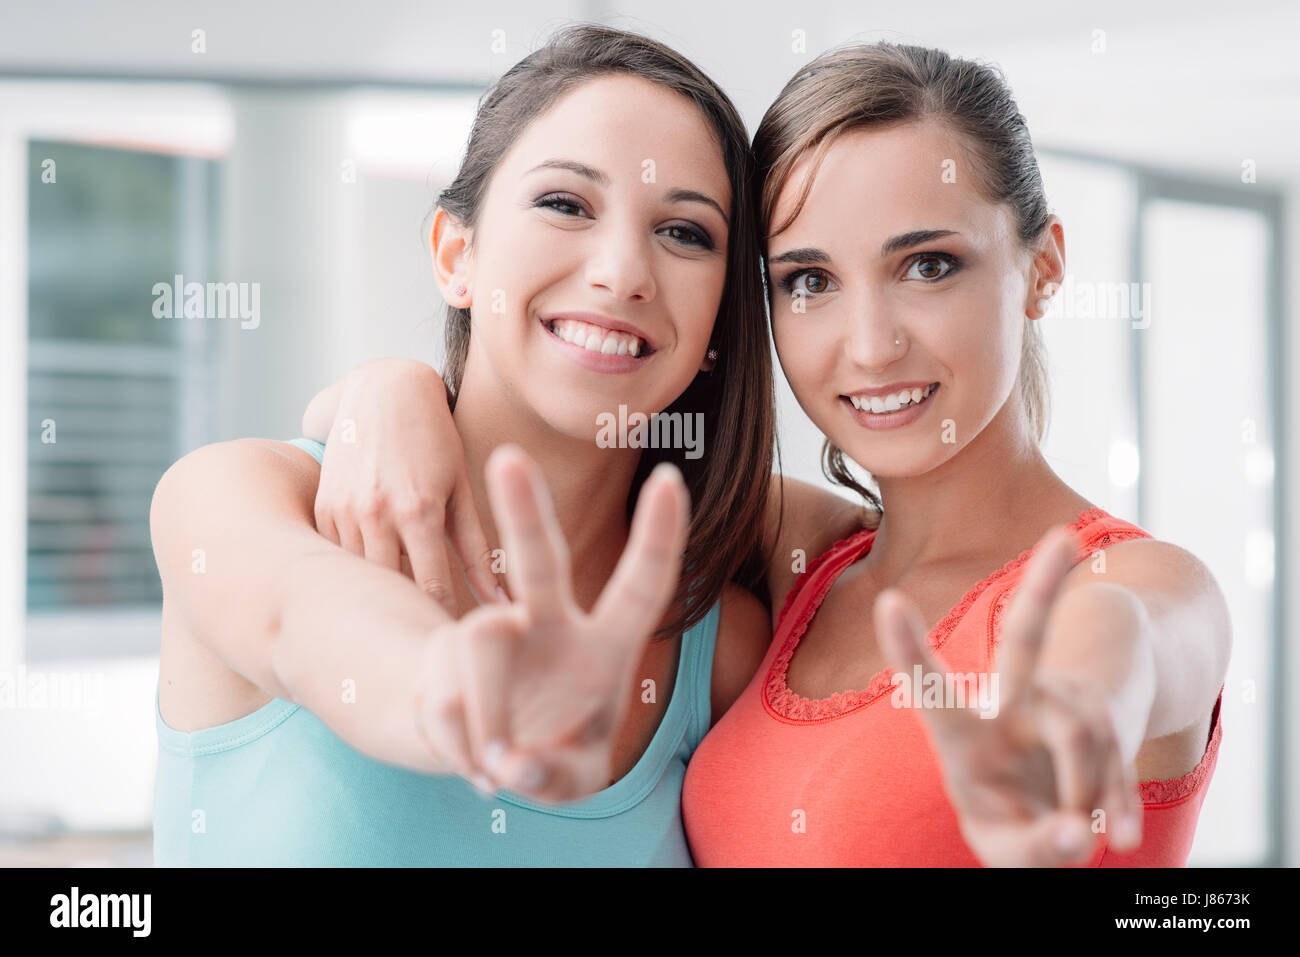 Cheerful teen girls posing, making a V sign and smiling at camera, one is hugging her friend Stock Photo